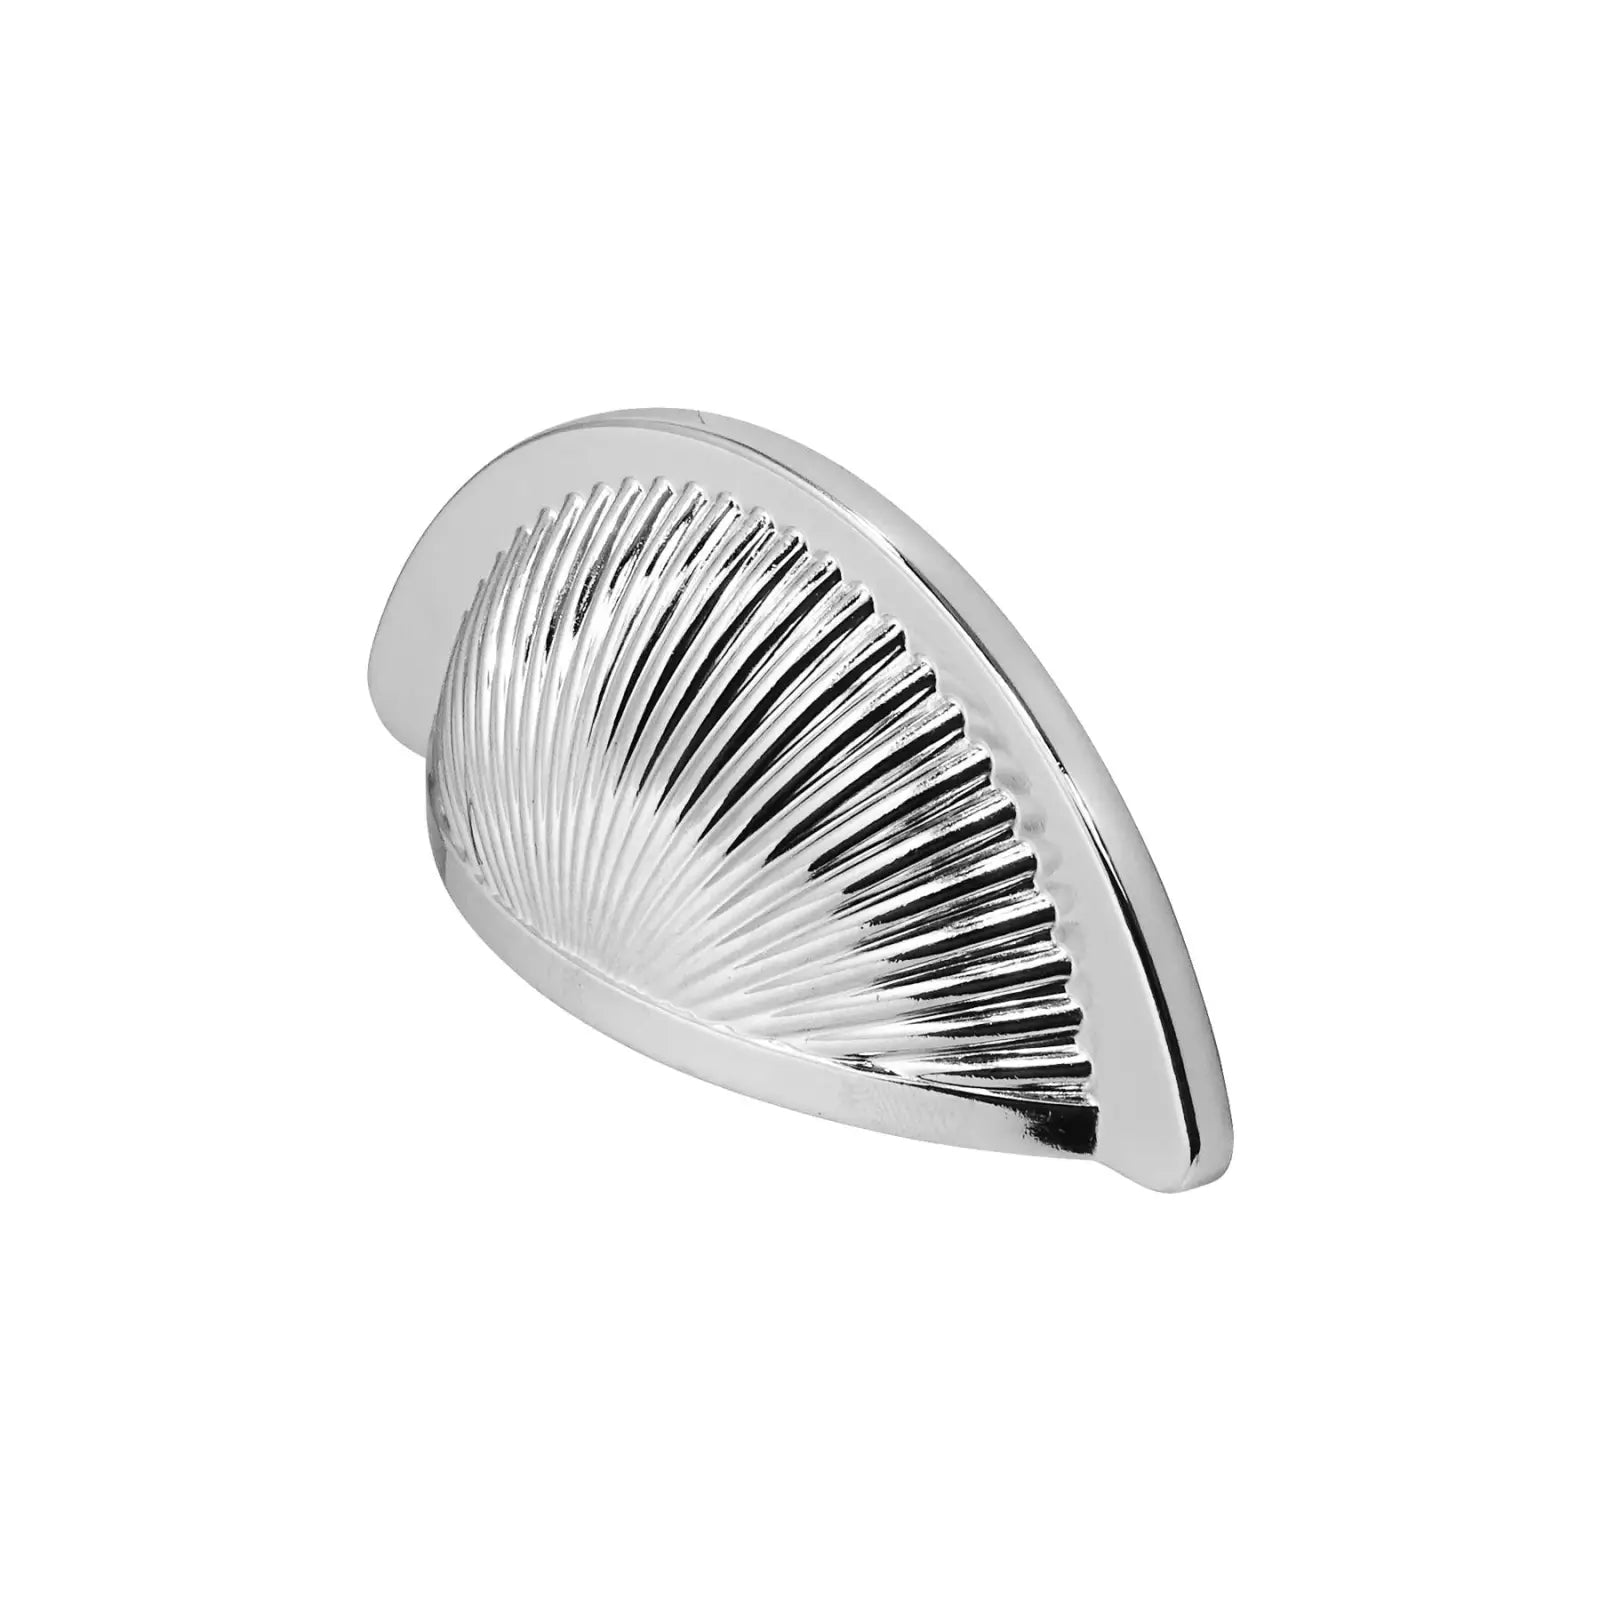 Arro - Kitchen Cabinet Cup Handle - Polished Chrome - Decor And Decor